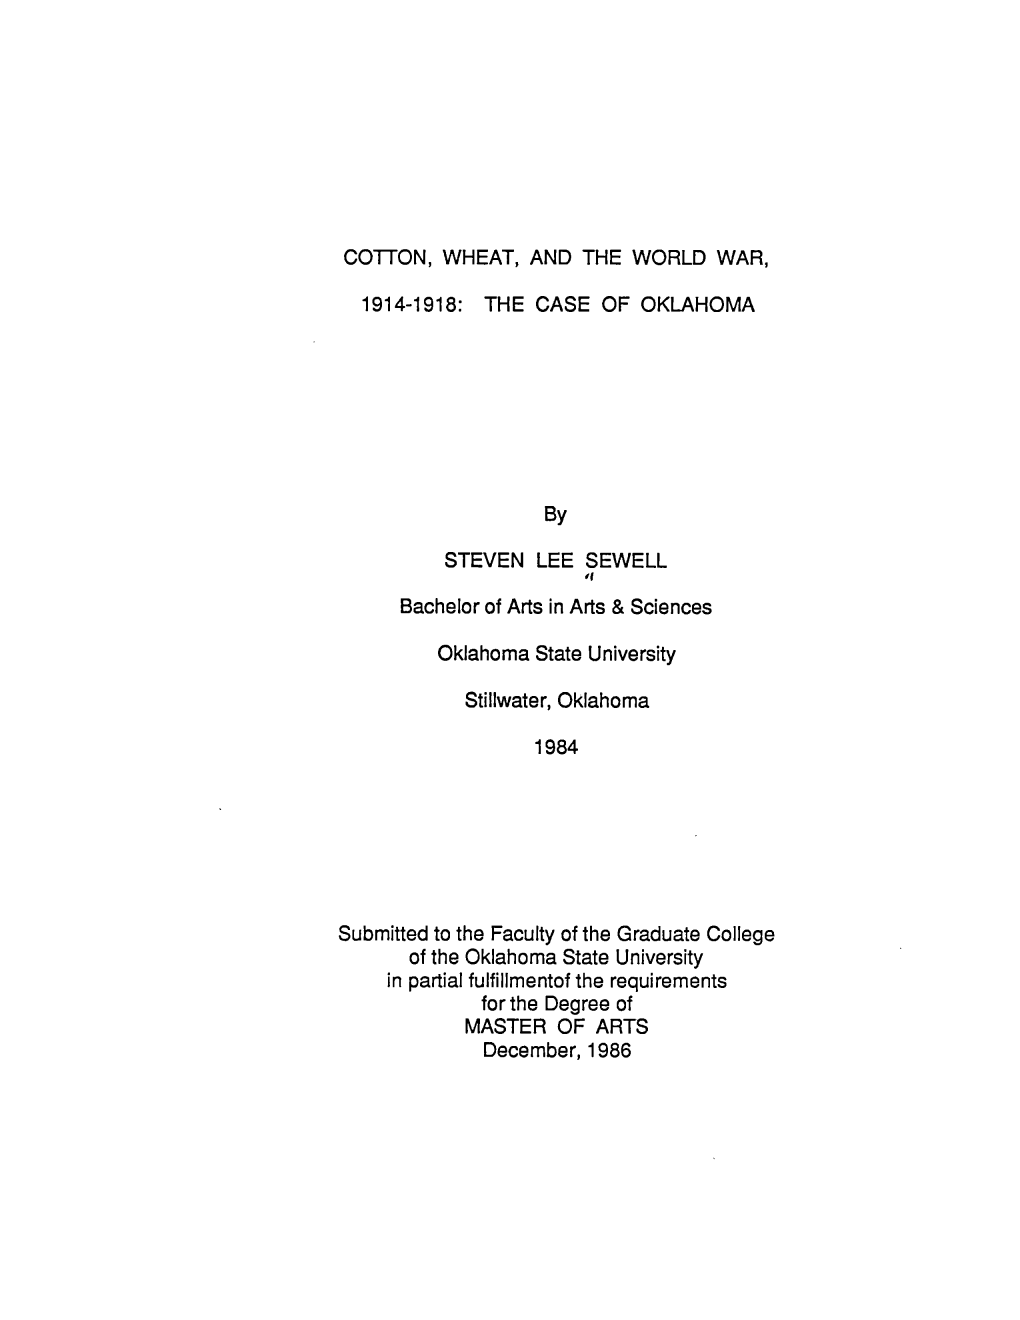 Cotton, Wheat, and the World War, 1914-1918: the Case of Oklahoma